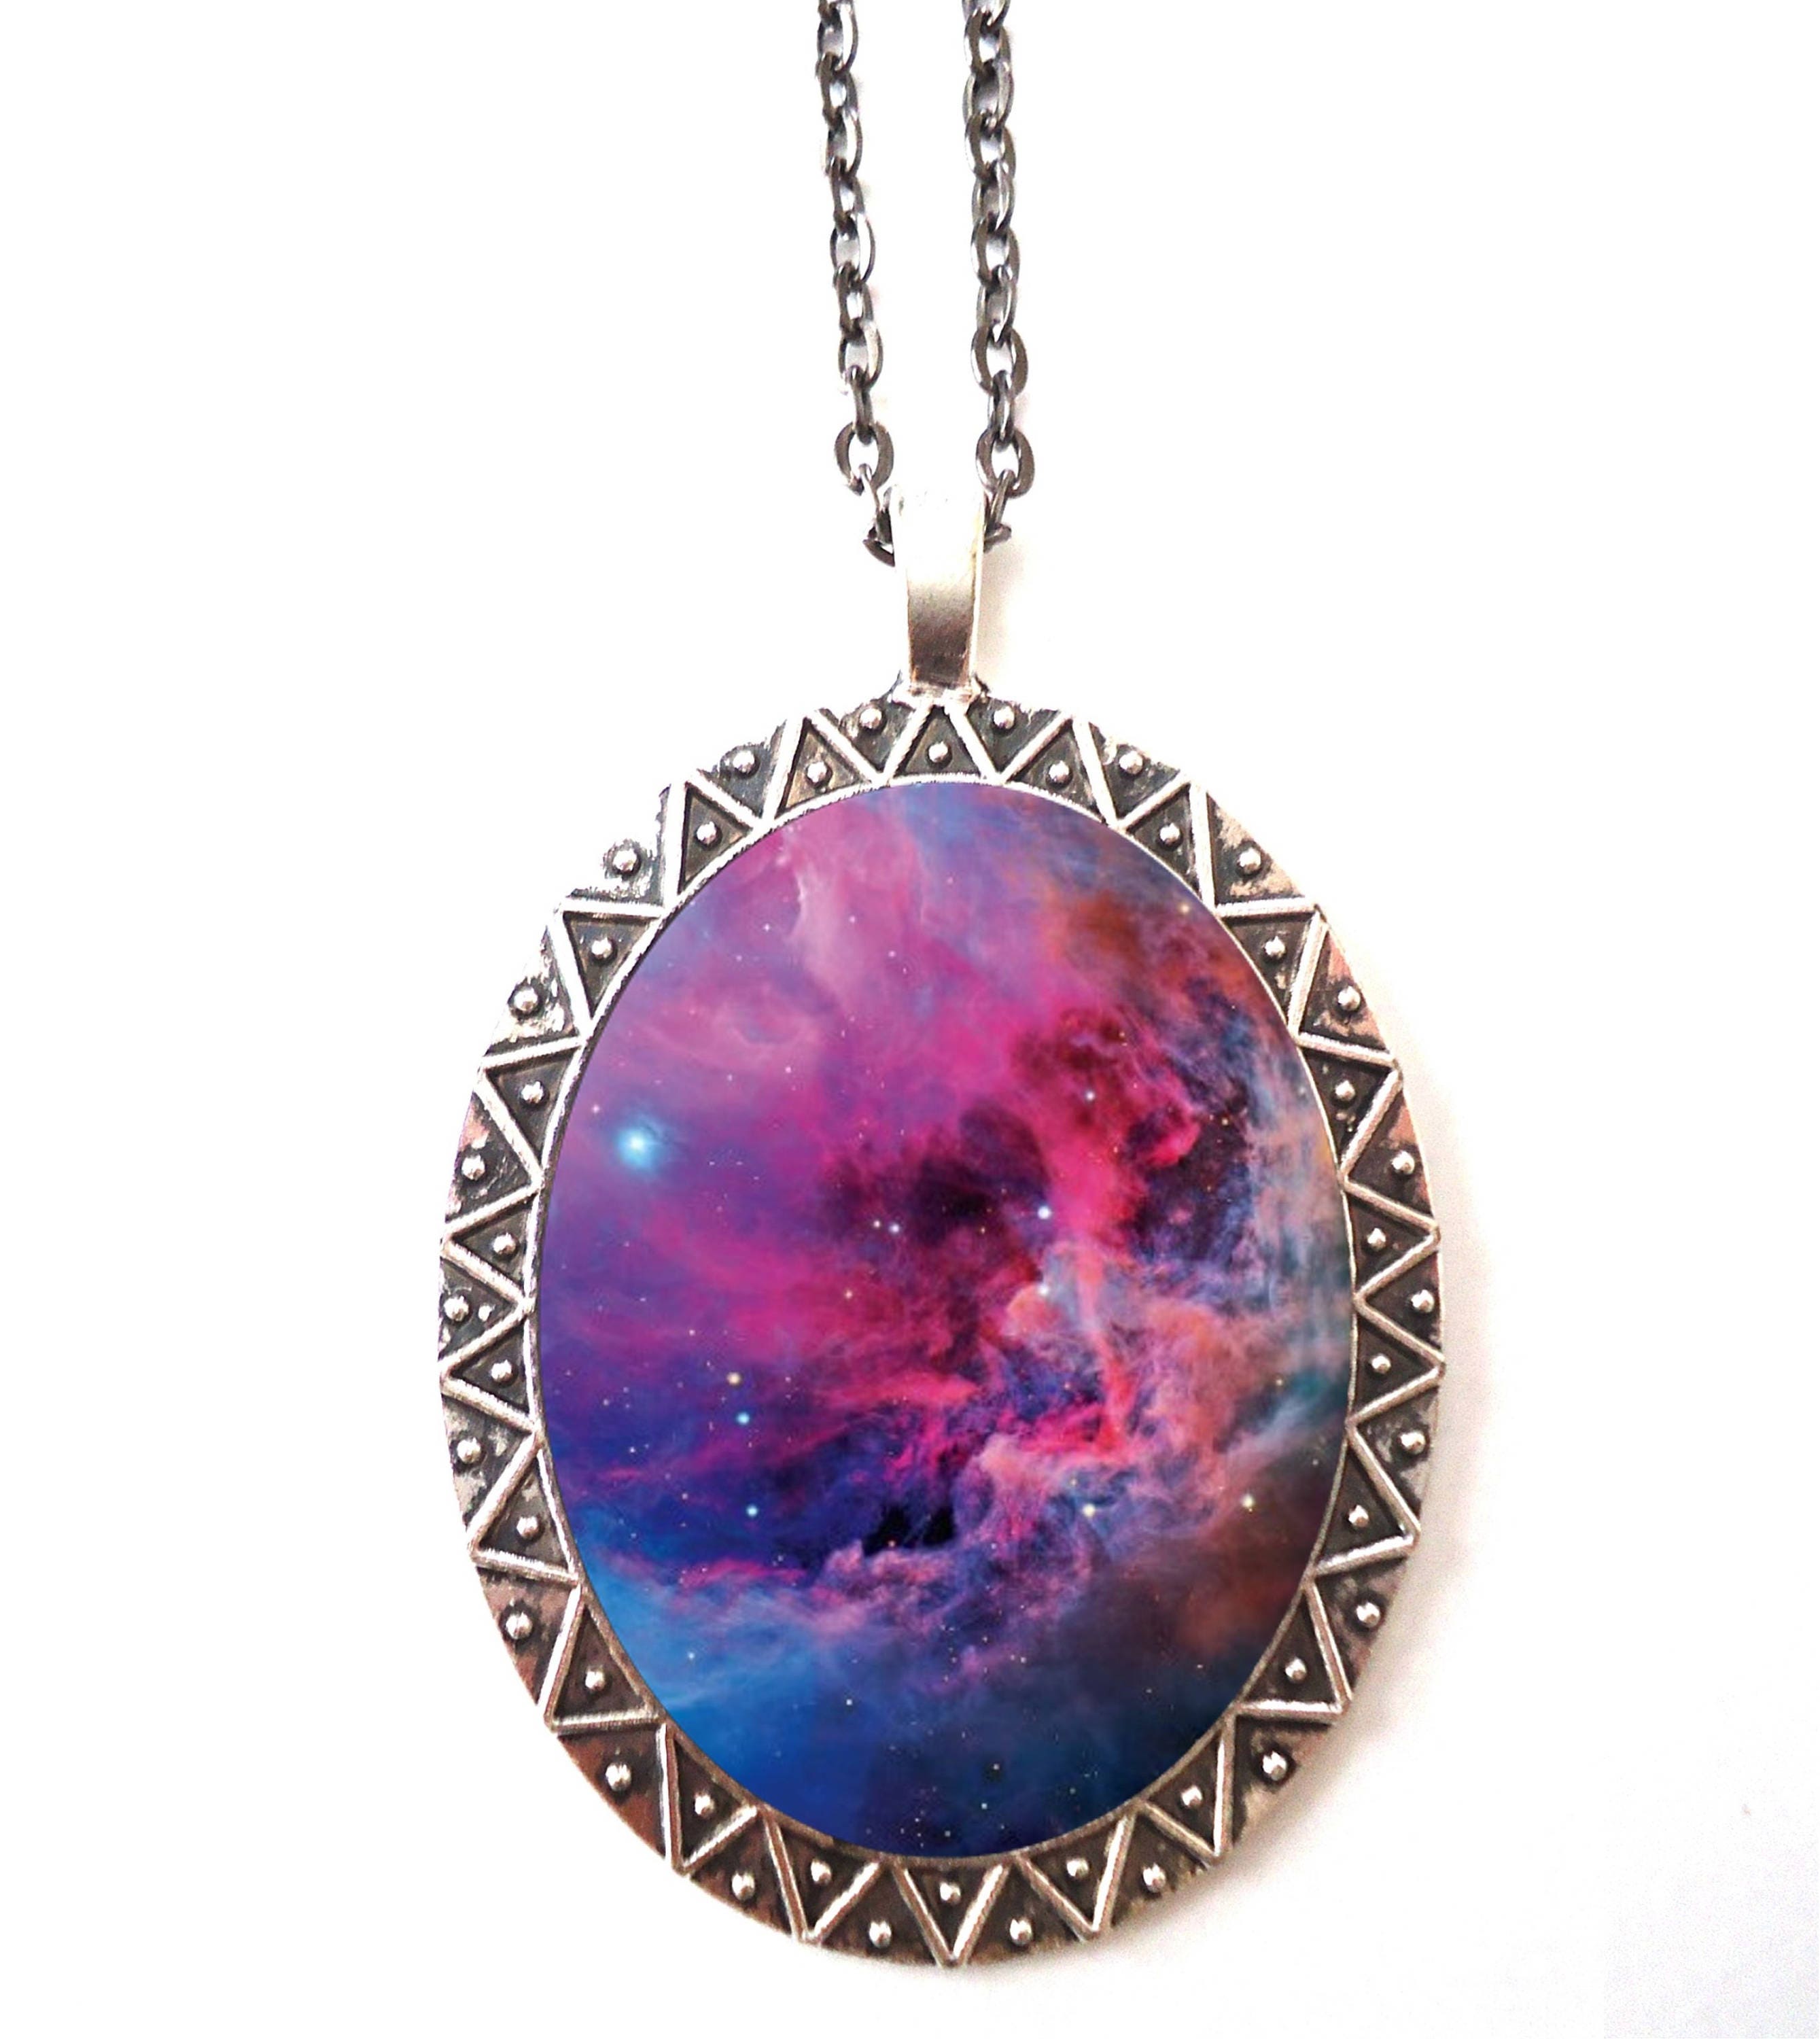 Outer Space Nebula Necklace Pendant Silver Tone Outerspace Etsy